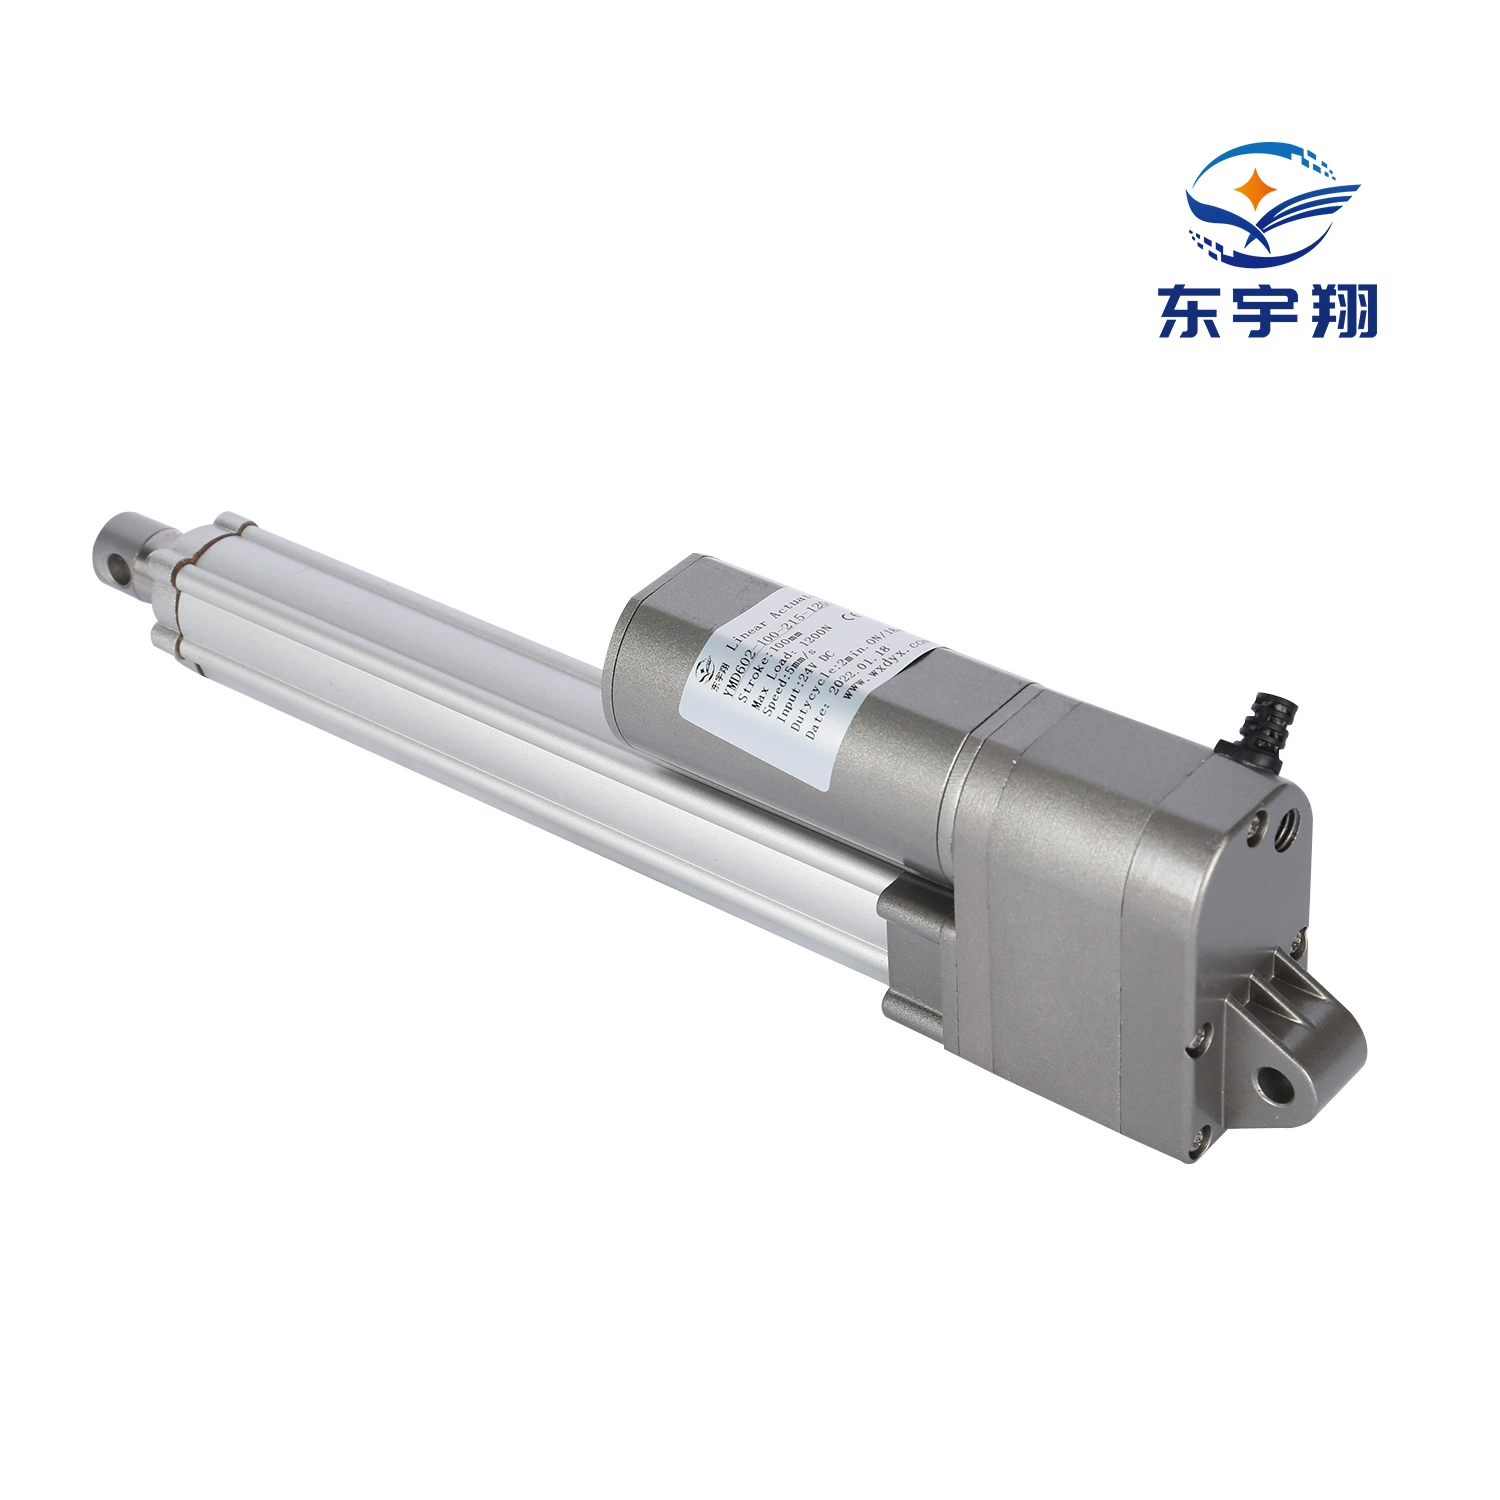 12V 24V 2000n Thrust Electric Linear Actuator Push Rod with Hall Sensor